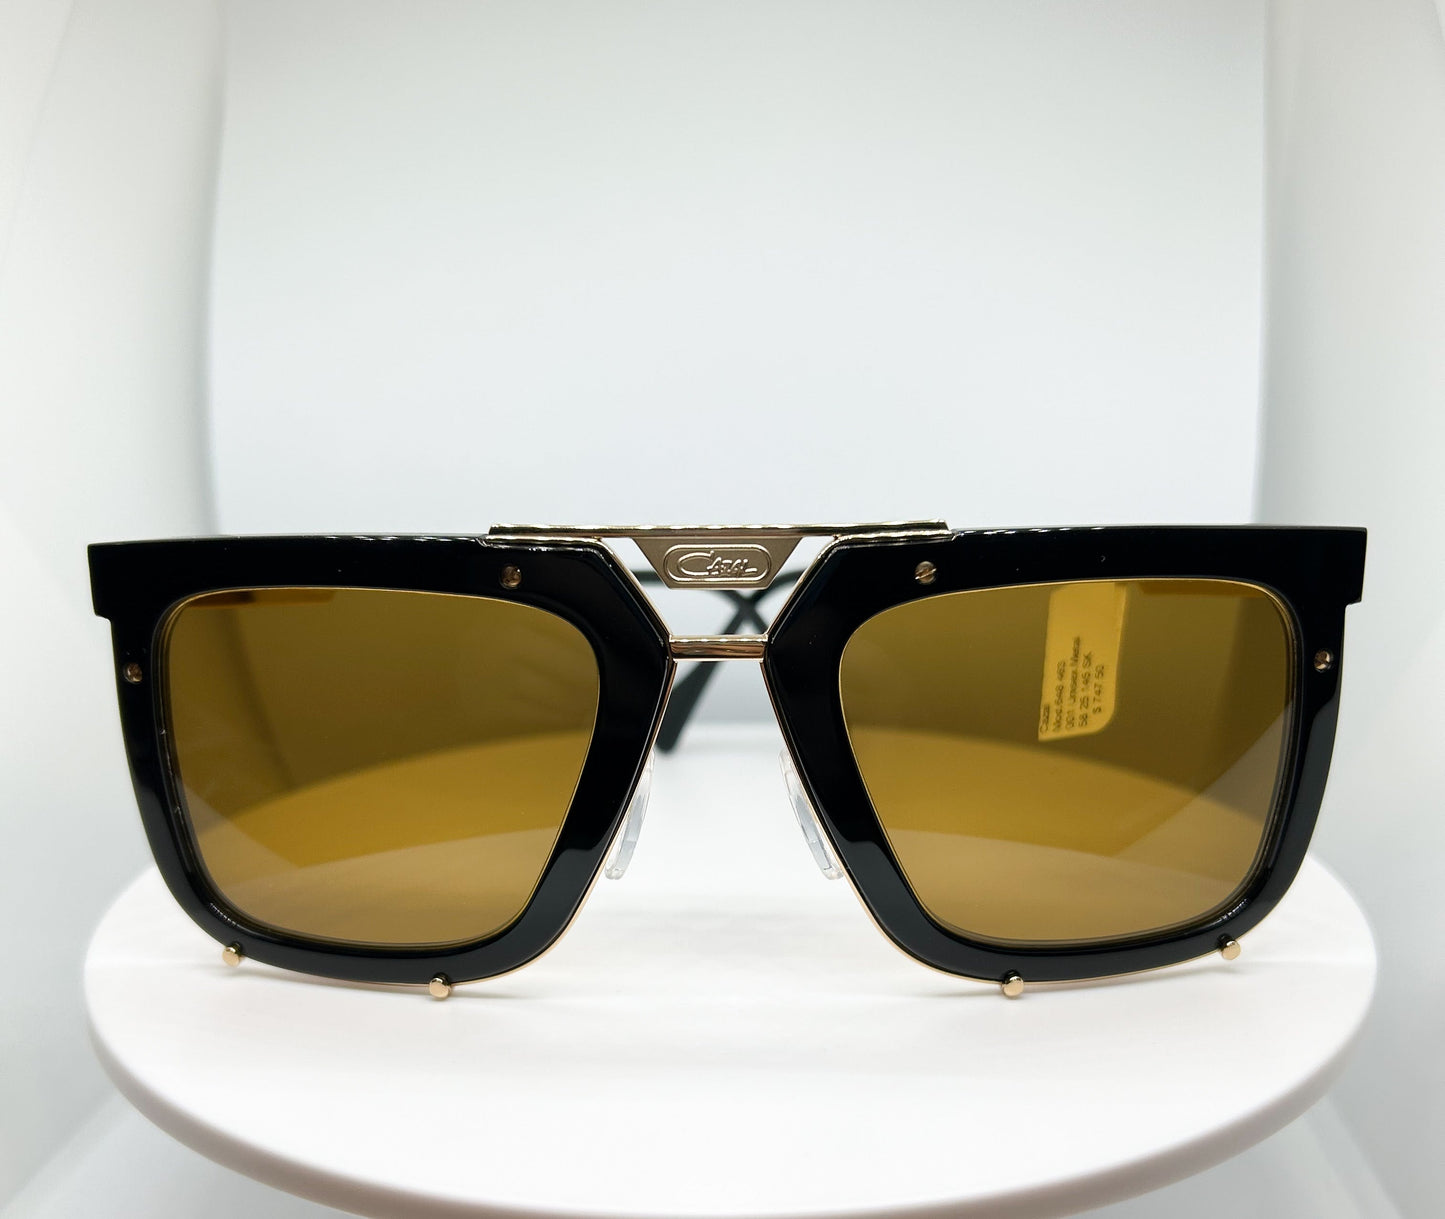 <p>CAZAL 648 is a  Black, Gold,  Metal & Acetate Sunglasses Frame with a Oval shape.  </p><p>Shop with confidence from Adair Eyewear, a CAZAL Authorized Dealer.  We have provided the best in customer service and great designer eyweear for over 40 years.</p>